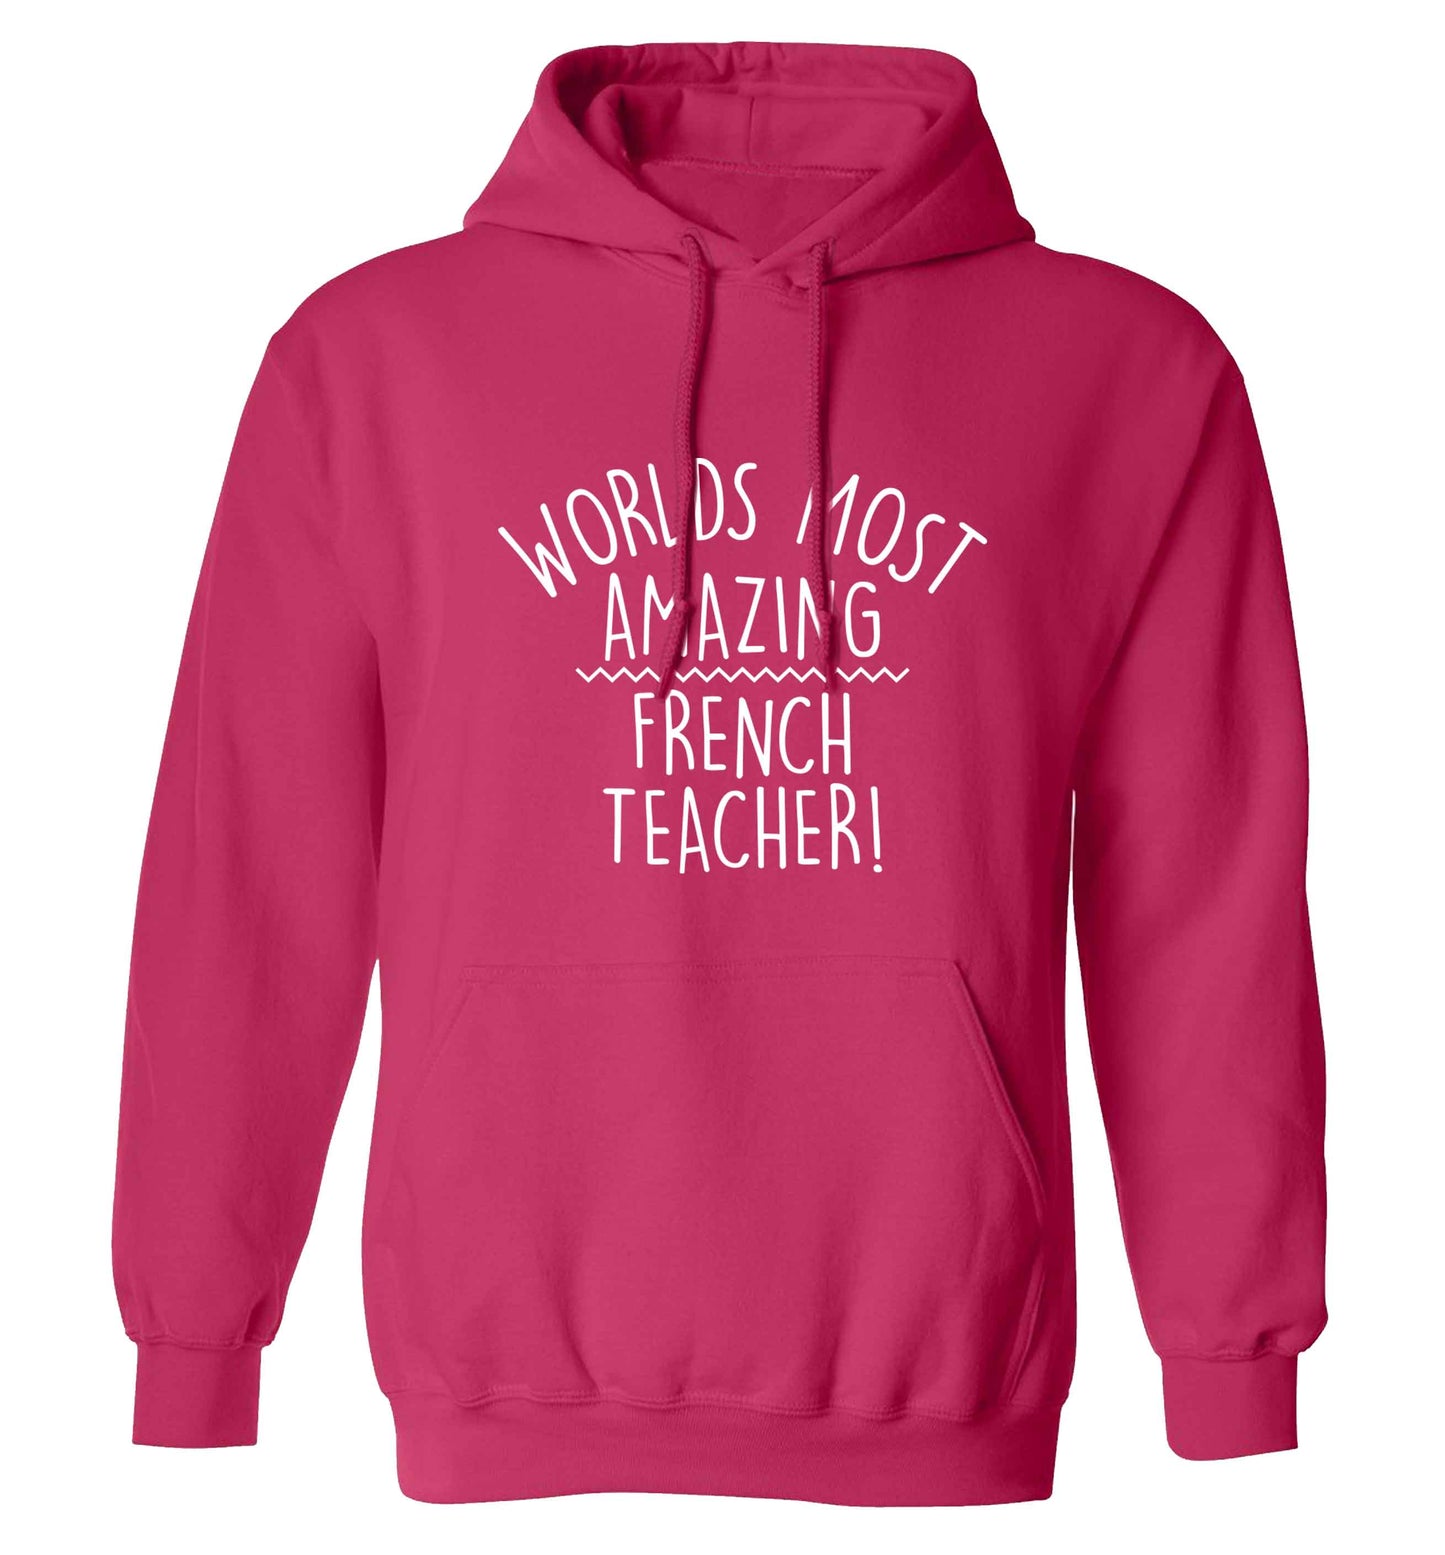 Worlds most amazing French teacher adults unisex pink hoodie 2XL